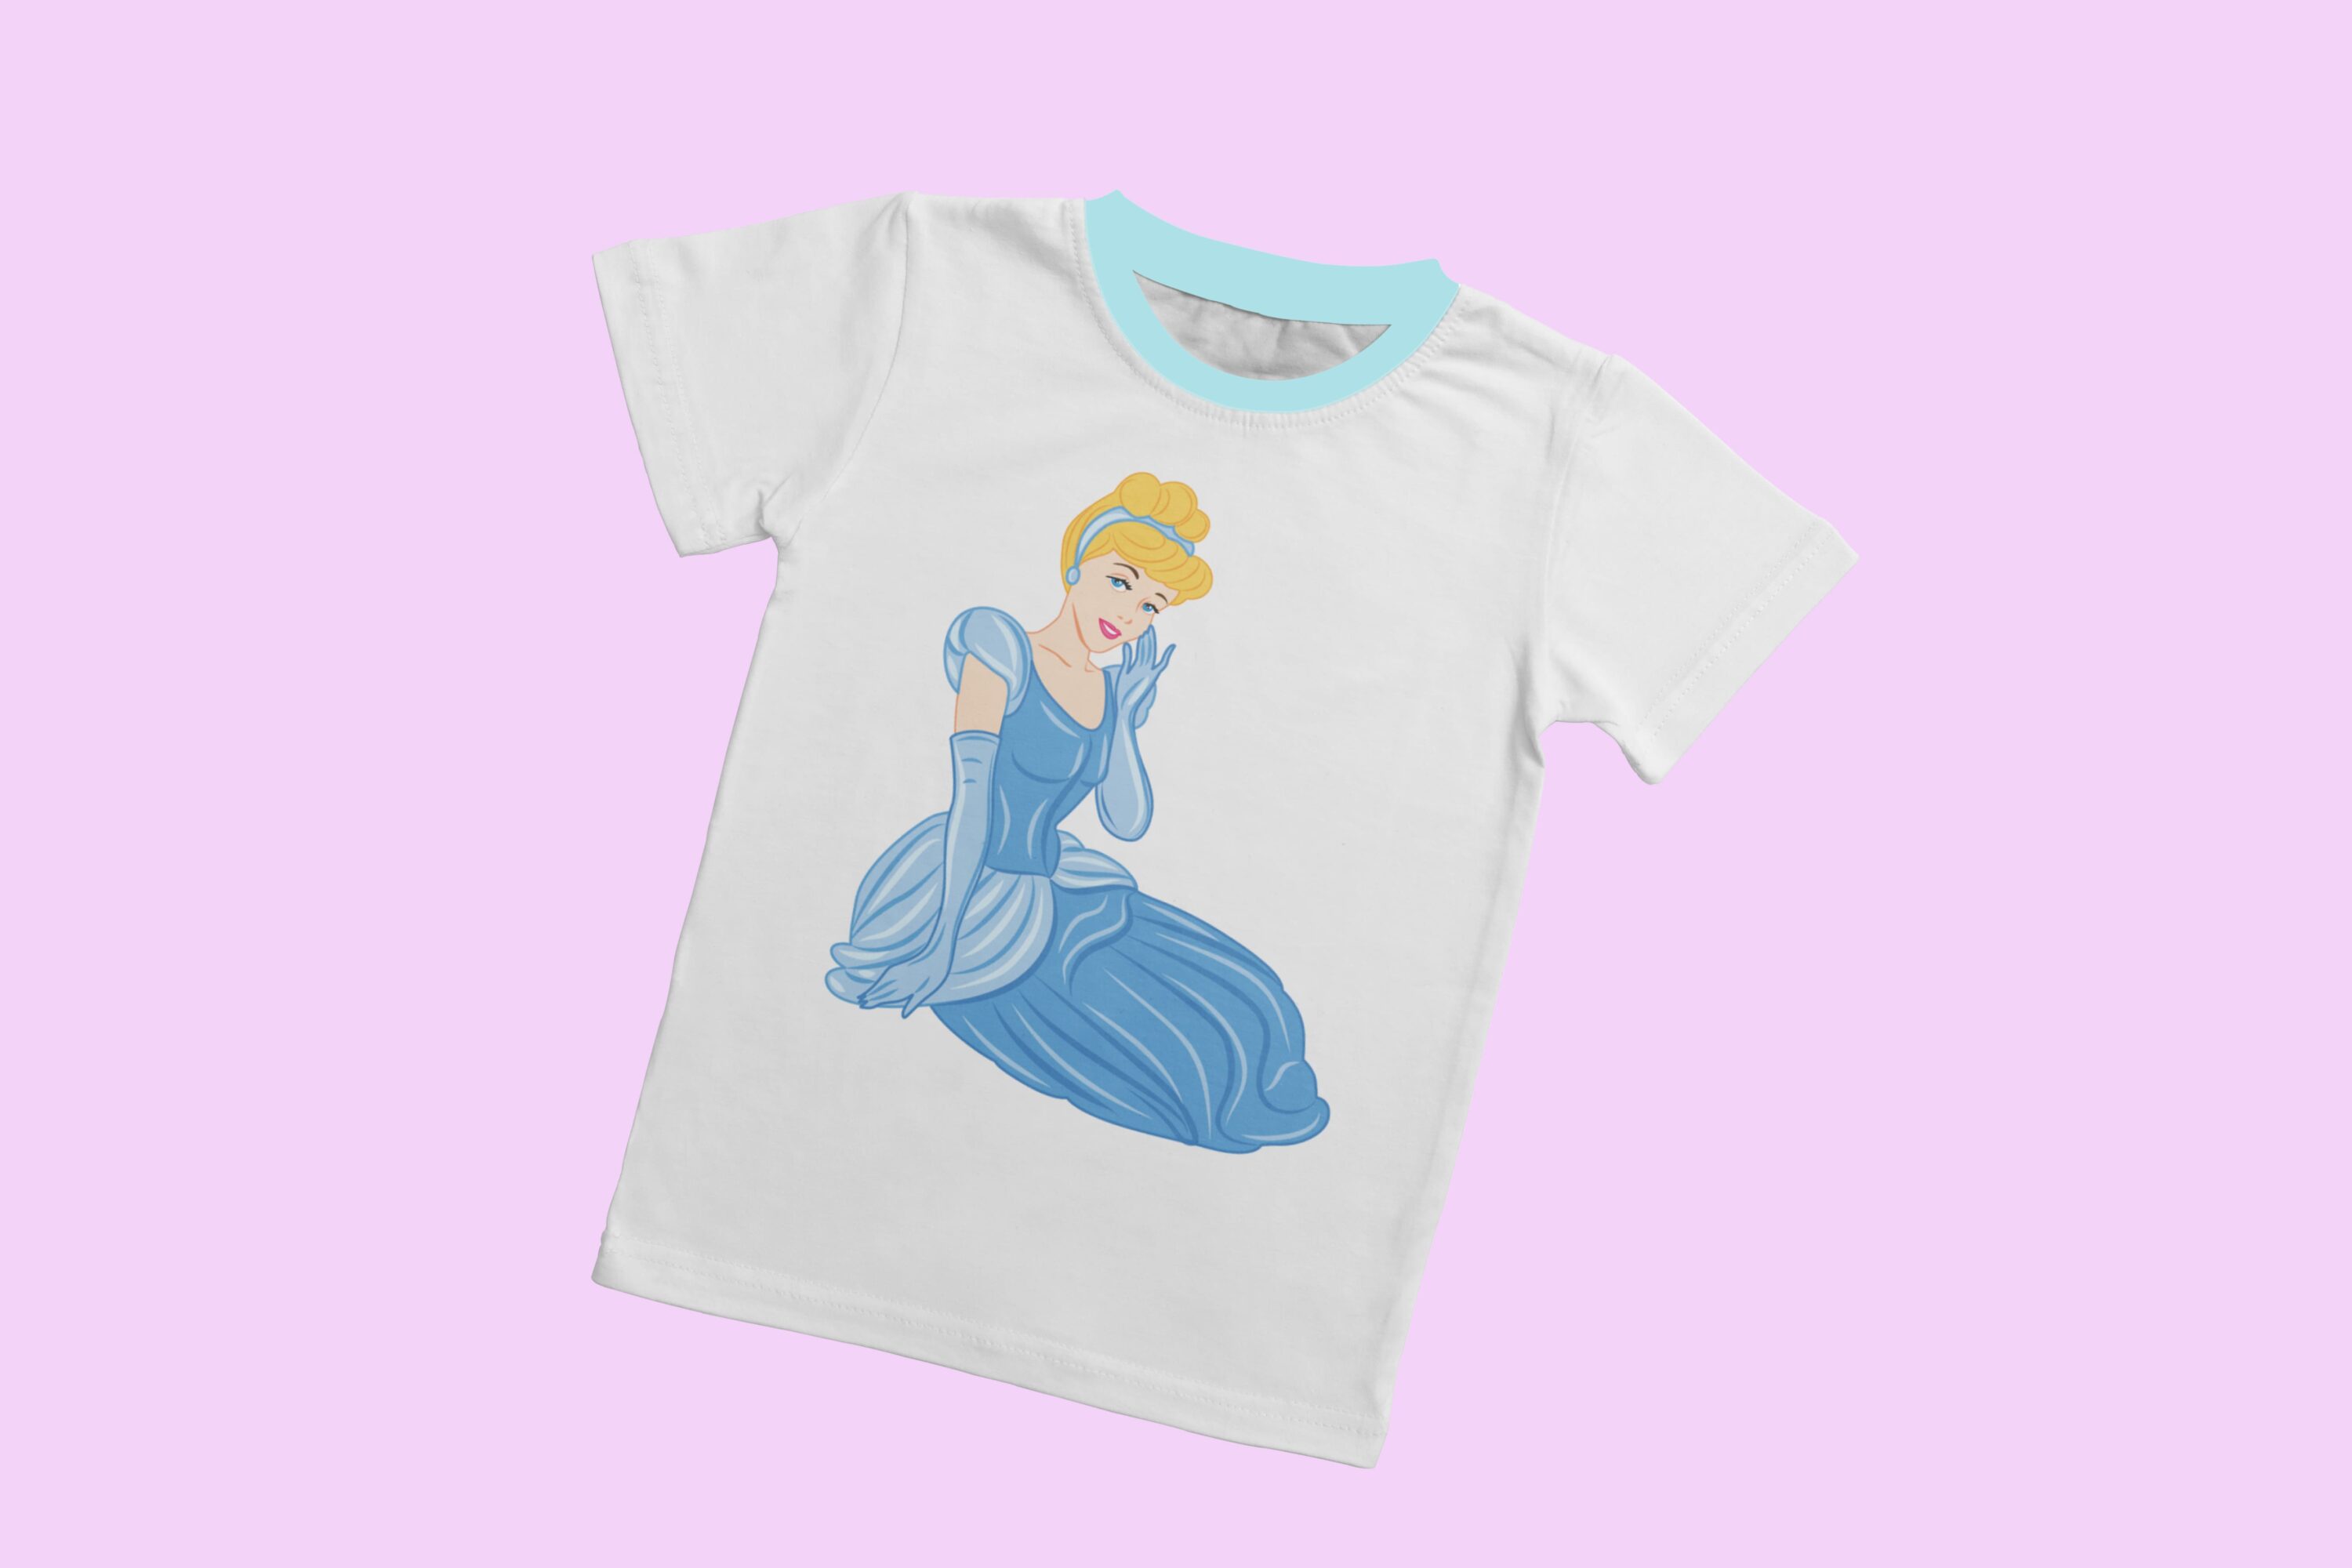 T-shirt image with colorful Cinderella print.